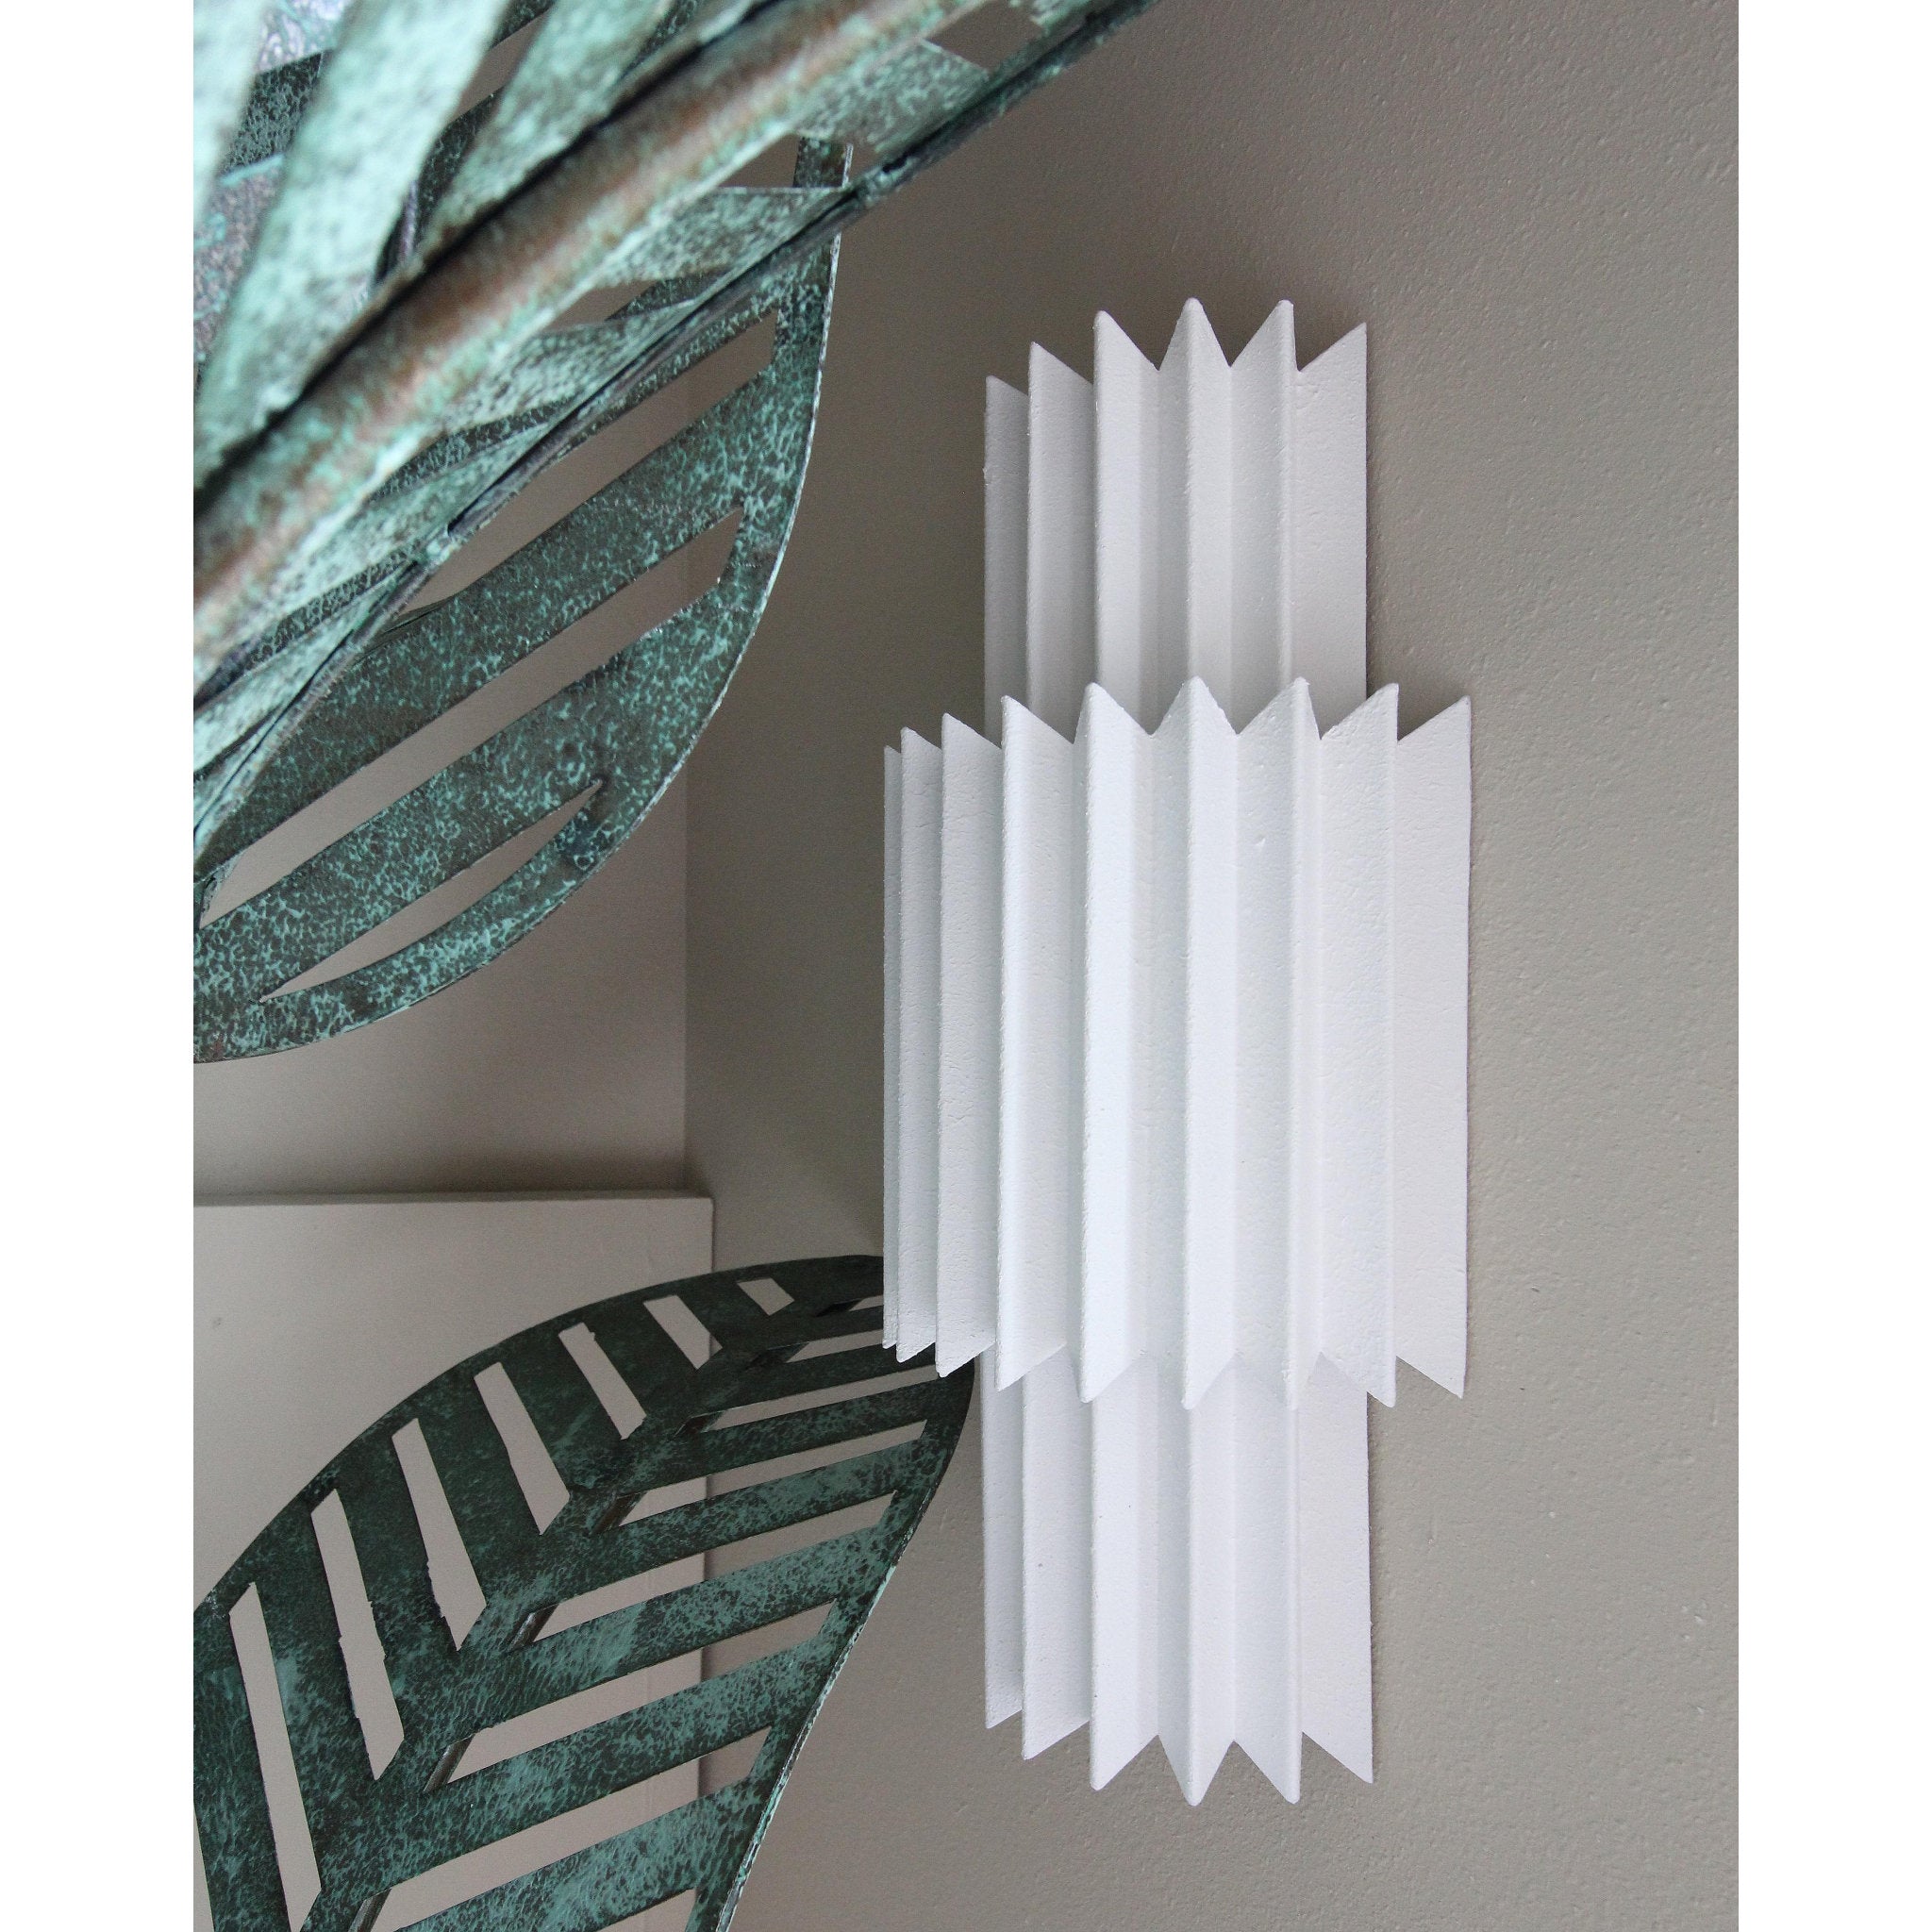 Moxy 2 Light Wall Sconce in Gesso White